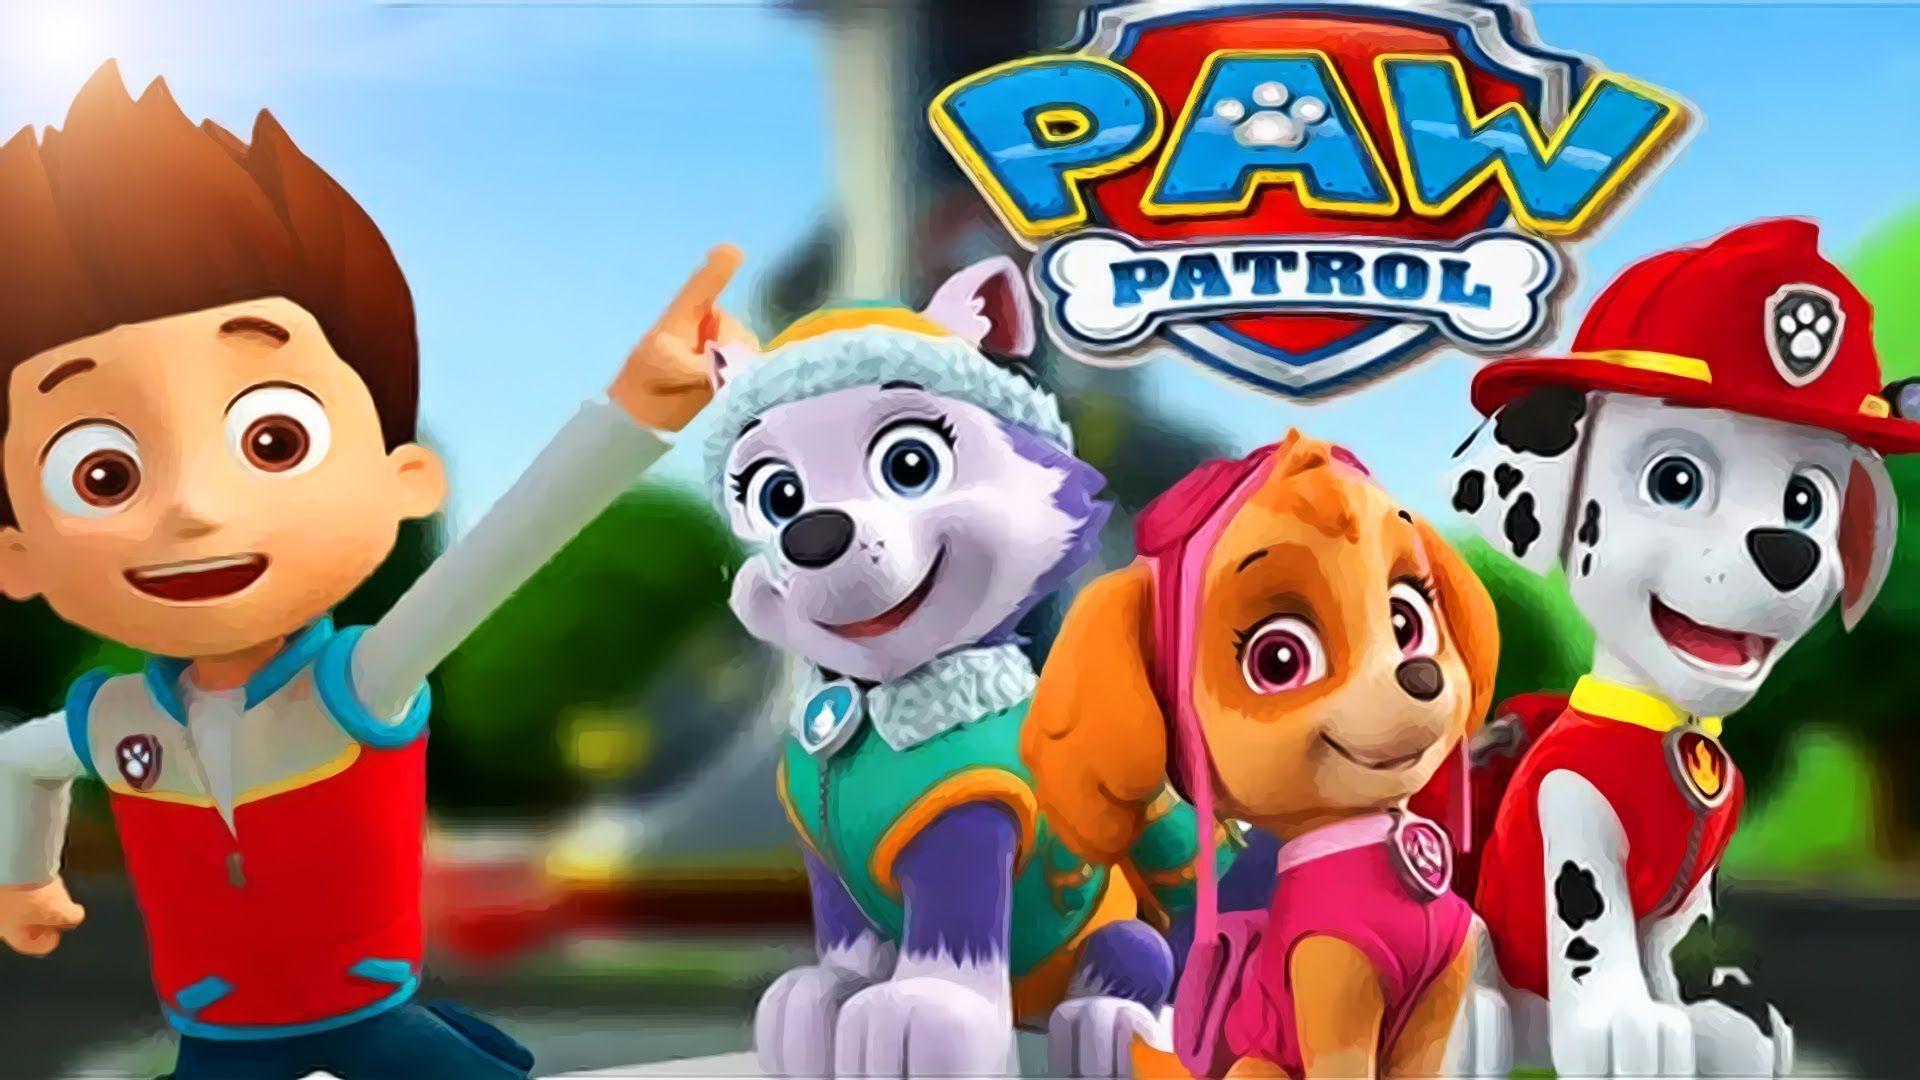 PC Paw Patrol Best Wallpapers.